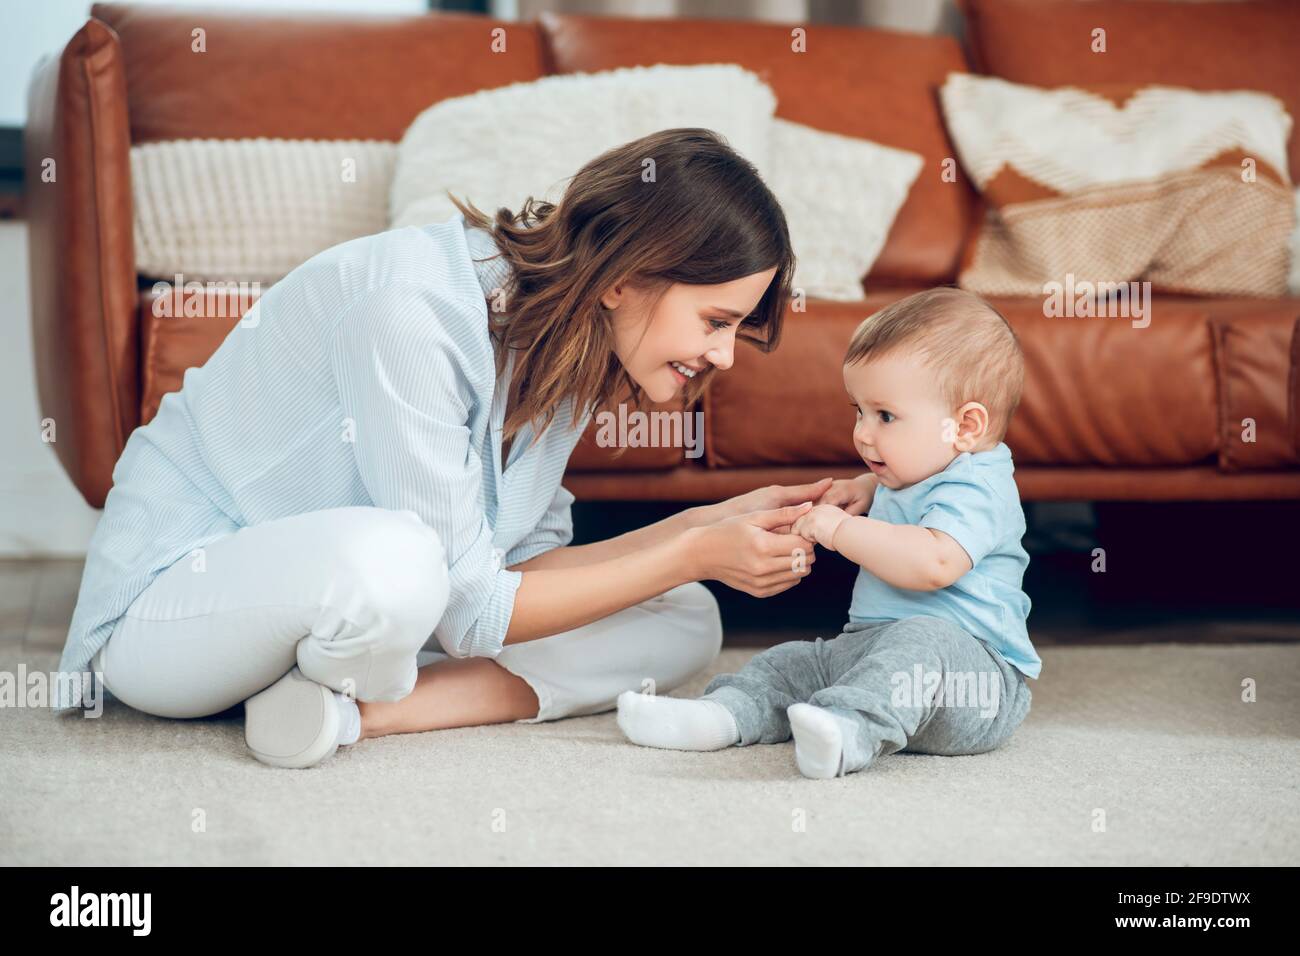 Mom and baby sitting on floor opposite each other Stock Photo